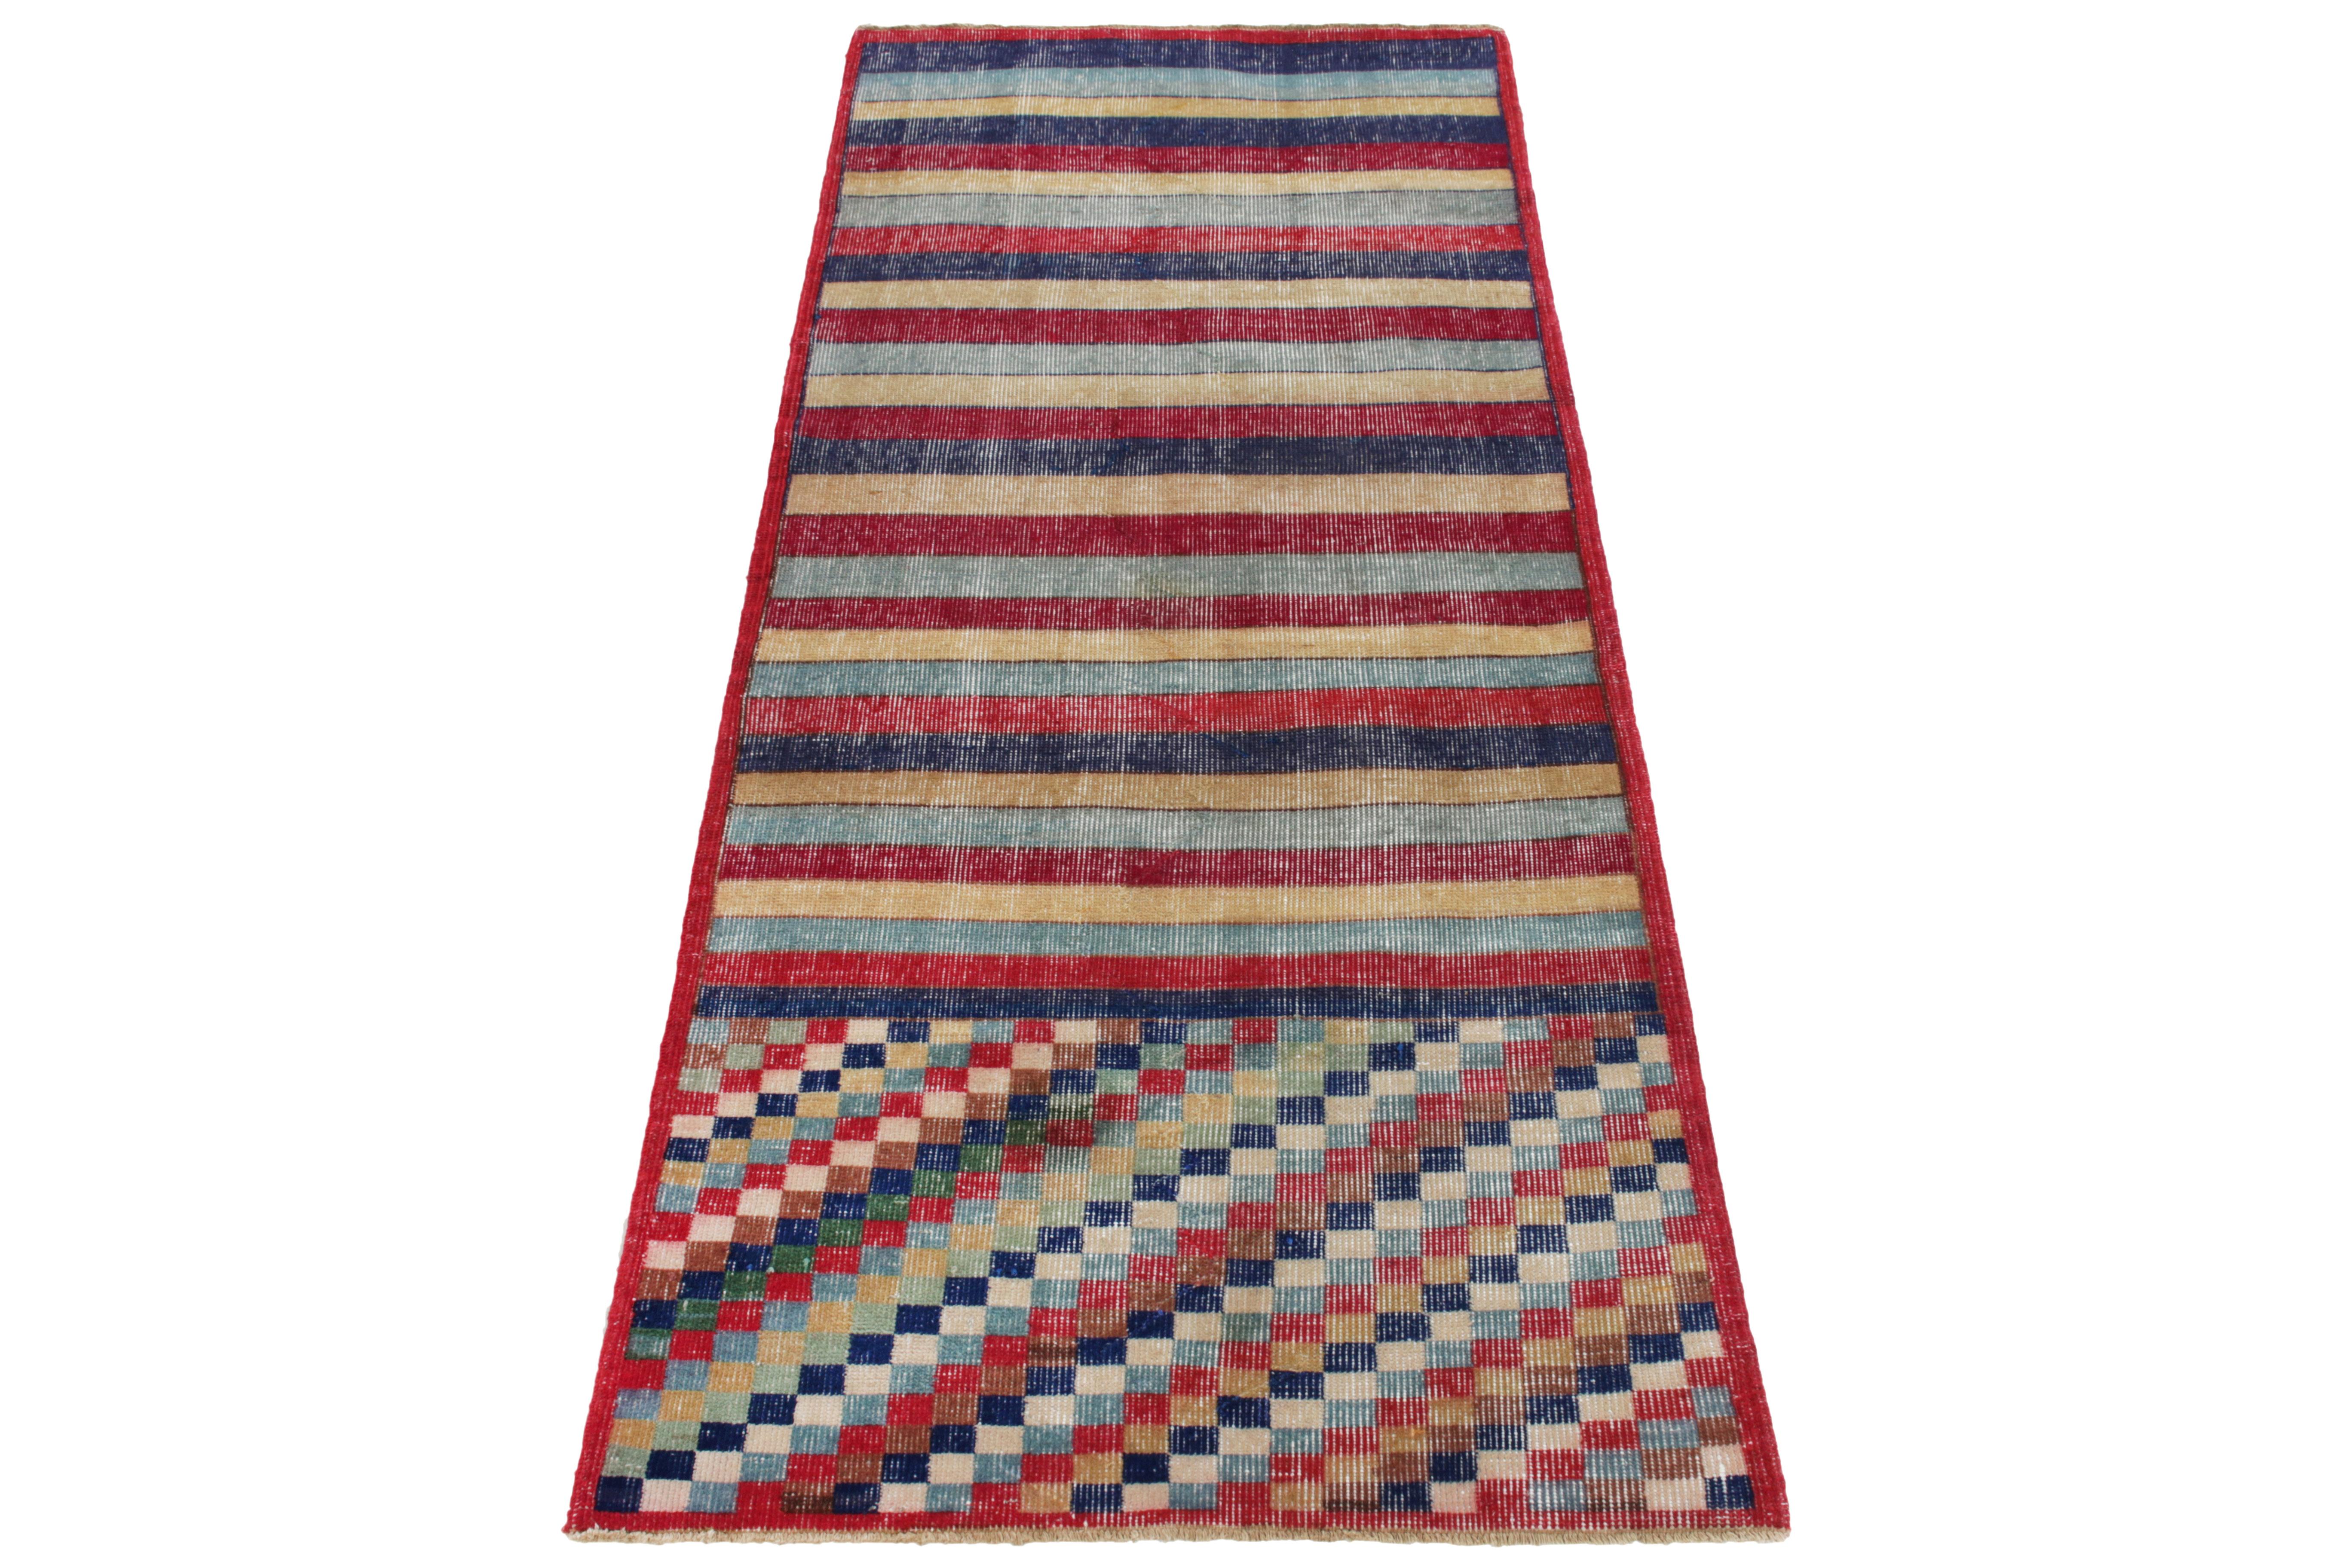 Hand-knotted in wool circa 1960-1970, a 3x7 vintage runner from a bold Turkish designer commemorated in Rug & Kilim’s Mid-Century Pasha Collection. The piece witnesses exceptional pagination with geometric & striped patterns in red, blue, beige &